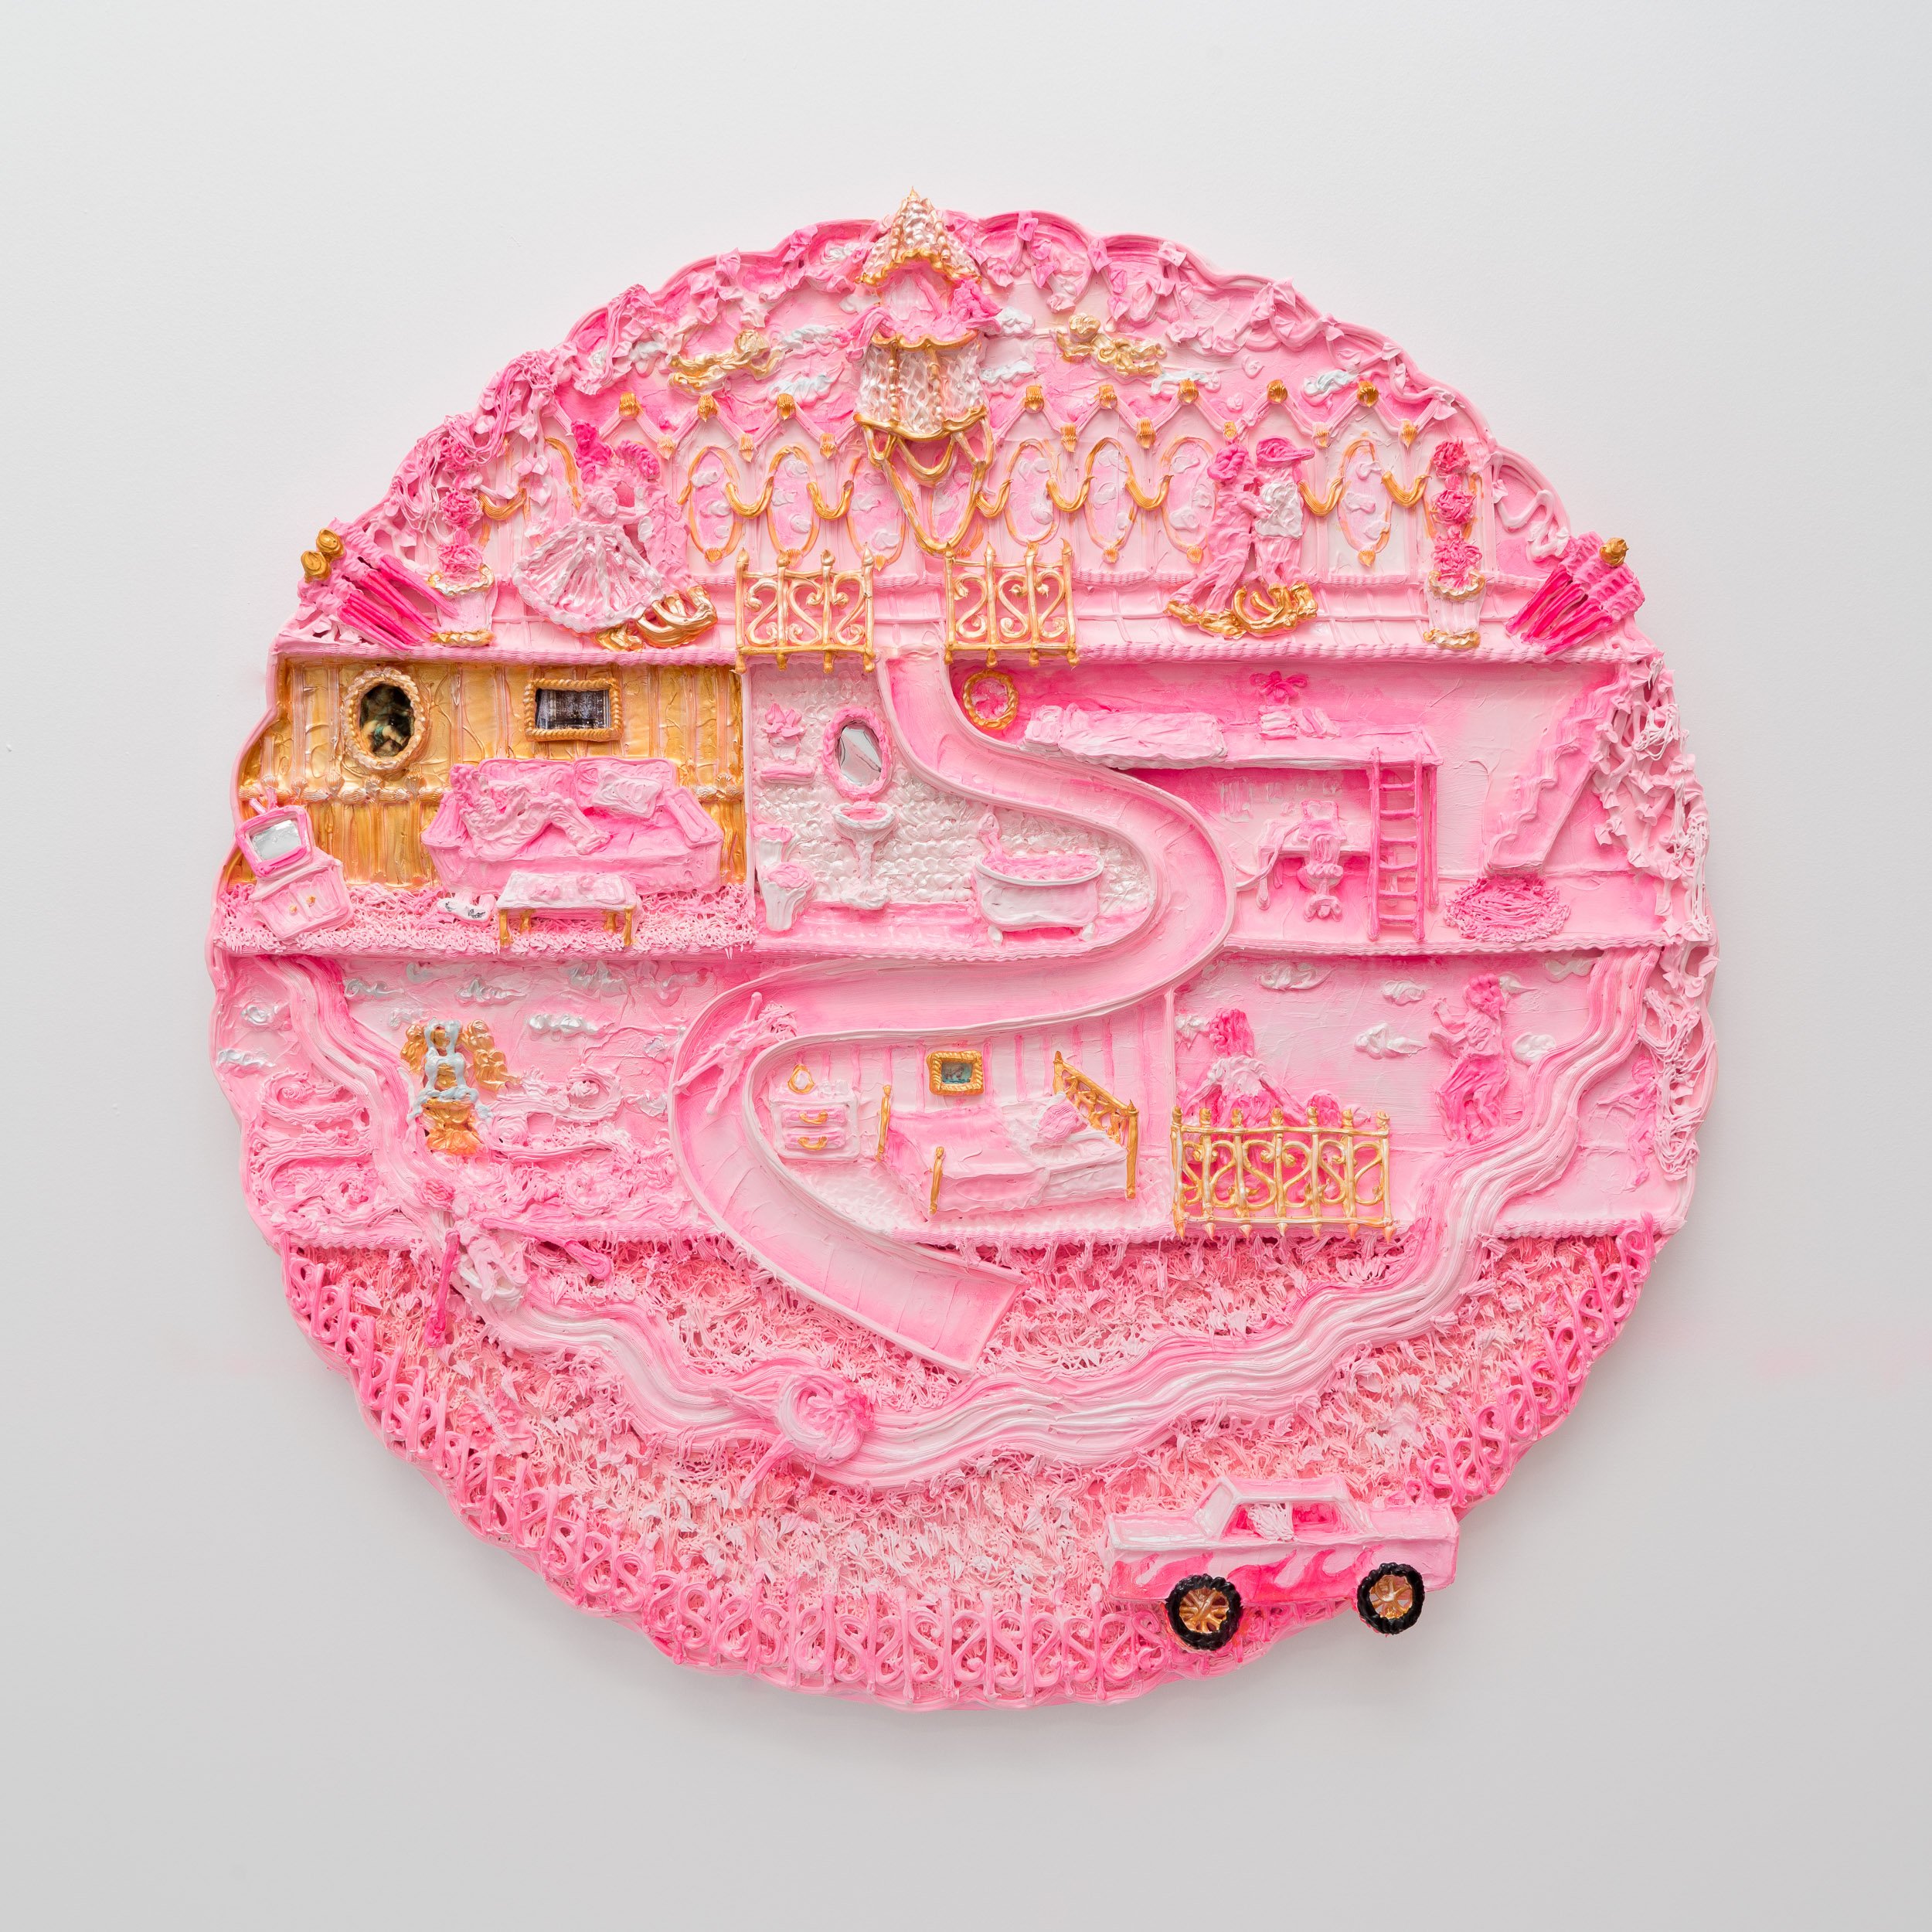 Surveillance Locket 2, 2021, acrylic piping and collage on panel, 36” diameter.